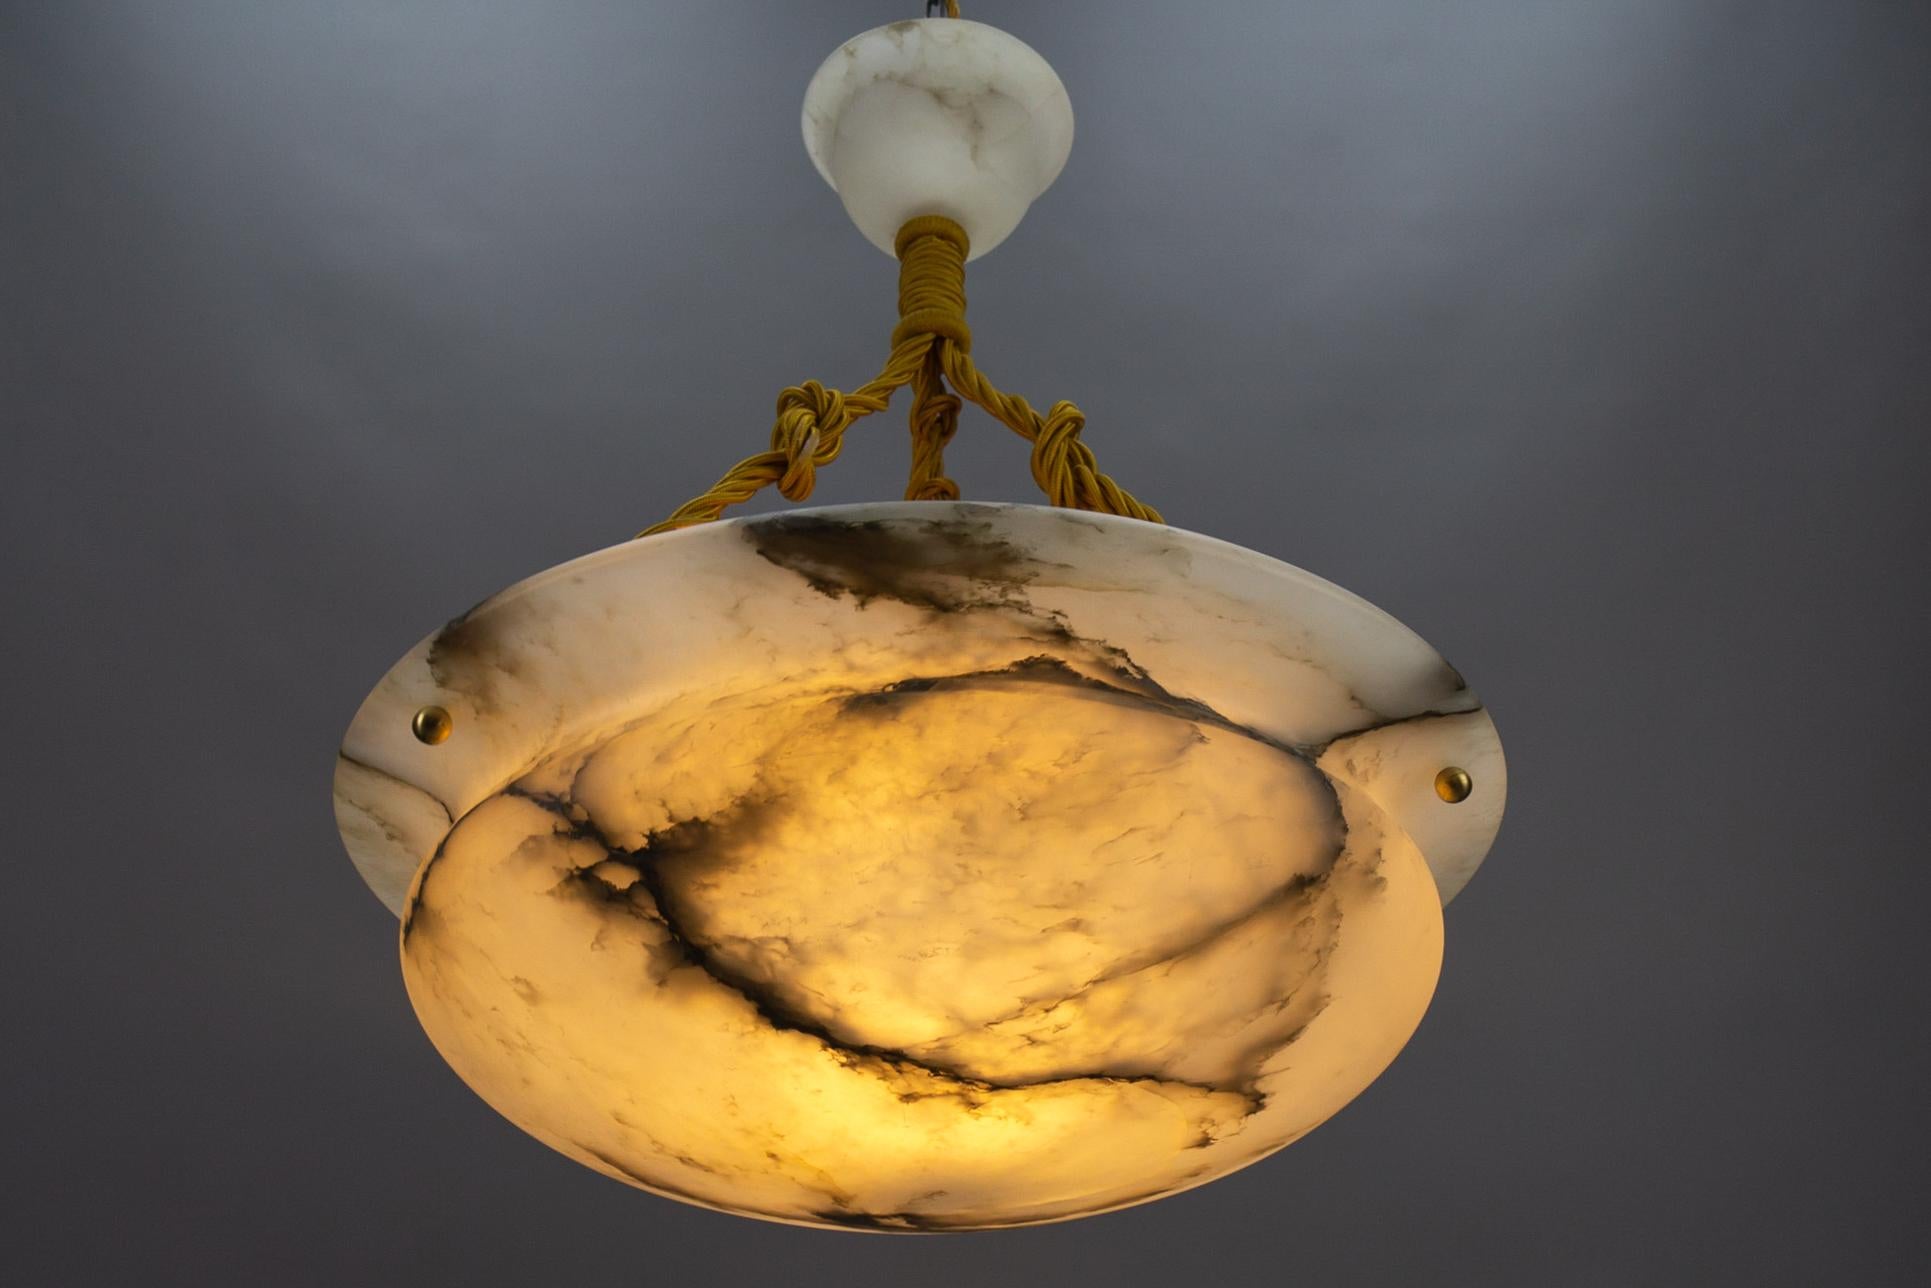 Antique French Art Deco black veined white alabaster pendant light fixture.
Gorgeous and beautifully shaped alabaster pendant ceiling light fixture from circa 1920. Superbly veined and masterfully carved white alabaster bowl suspended by three ropes